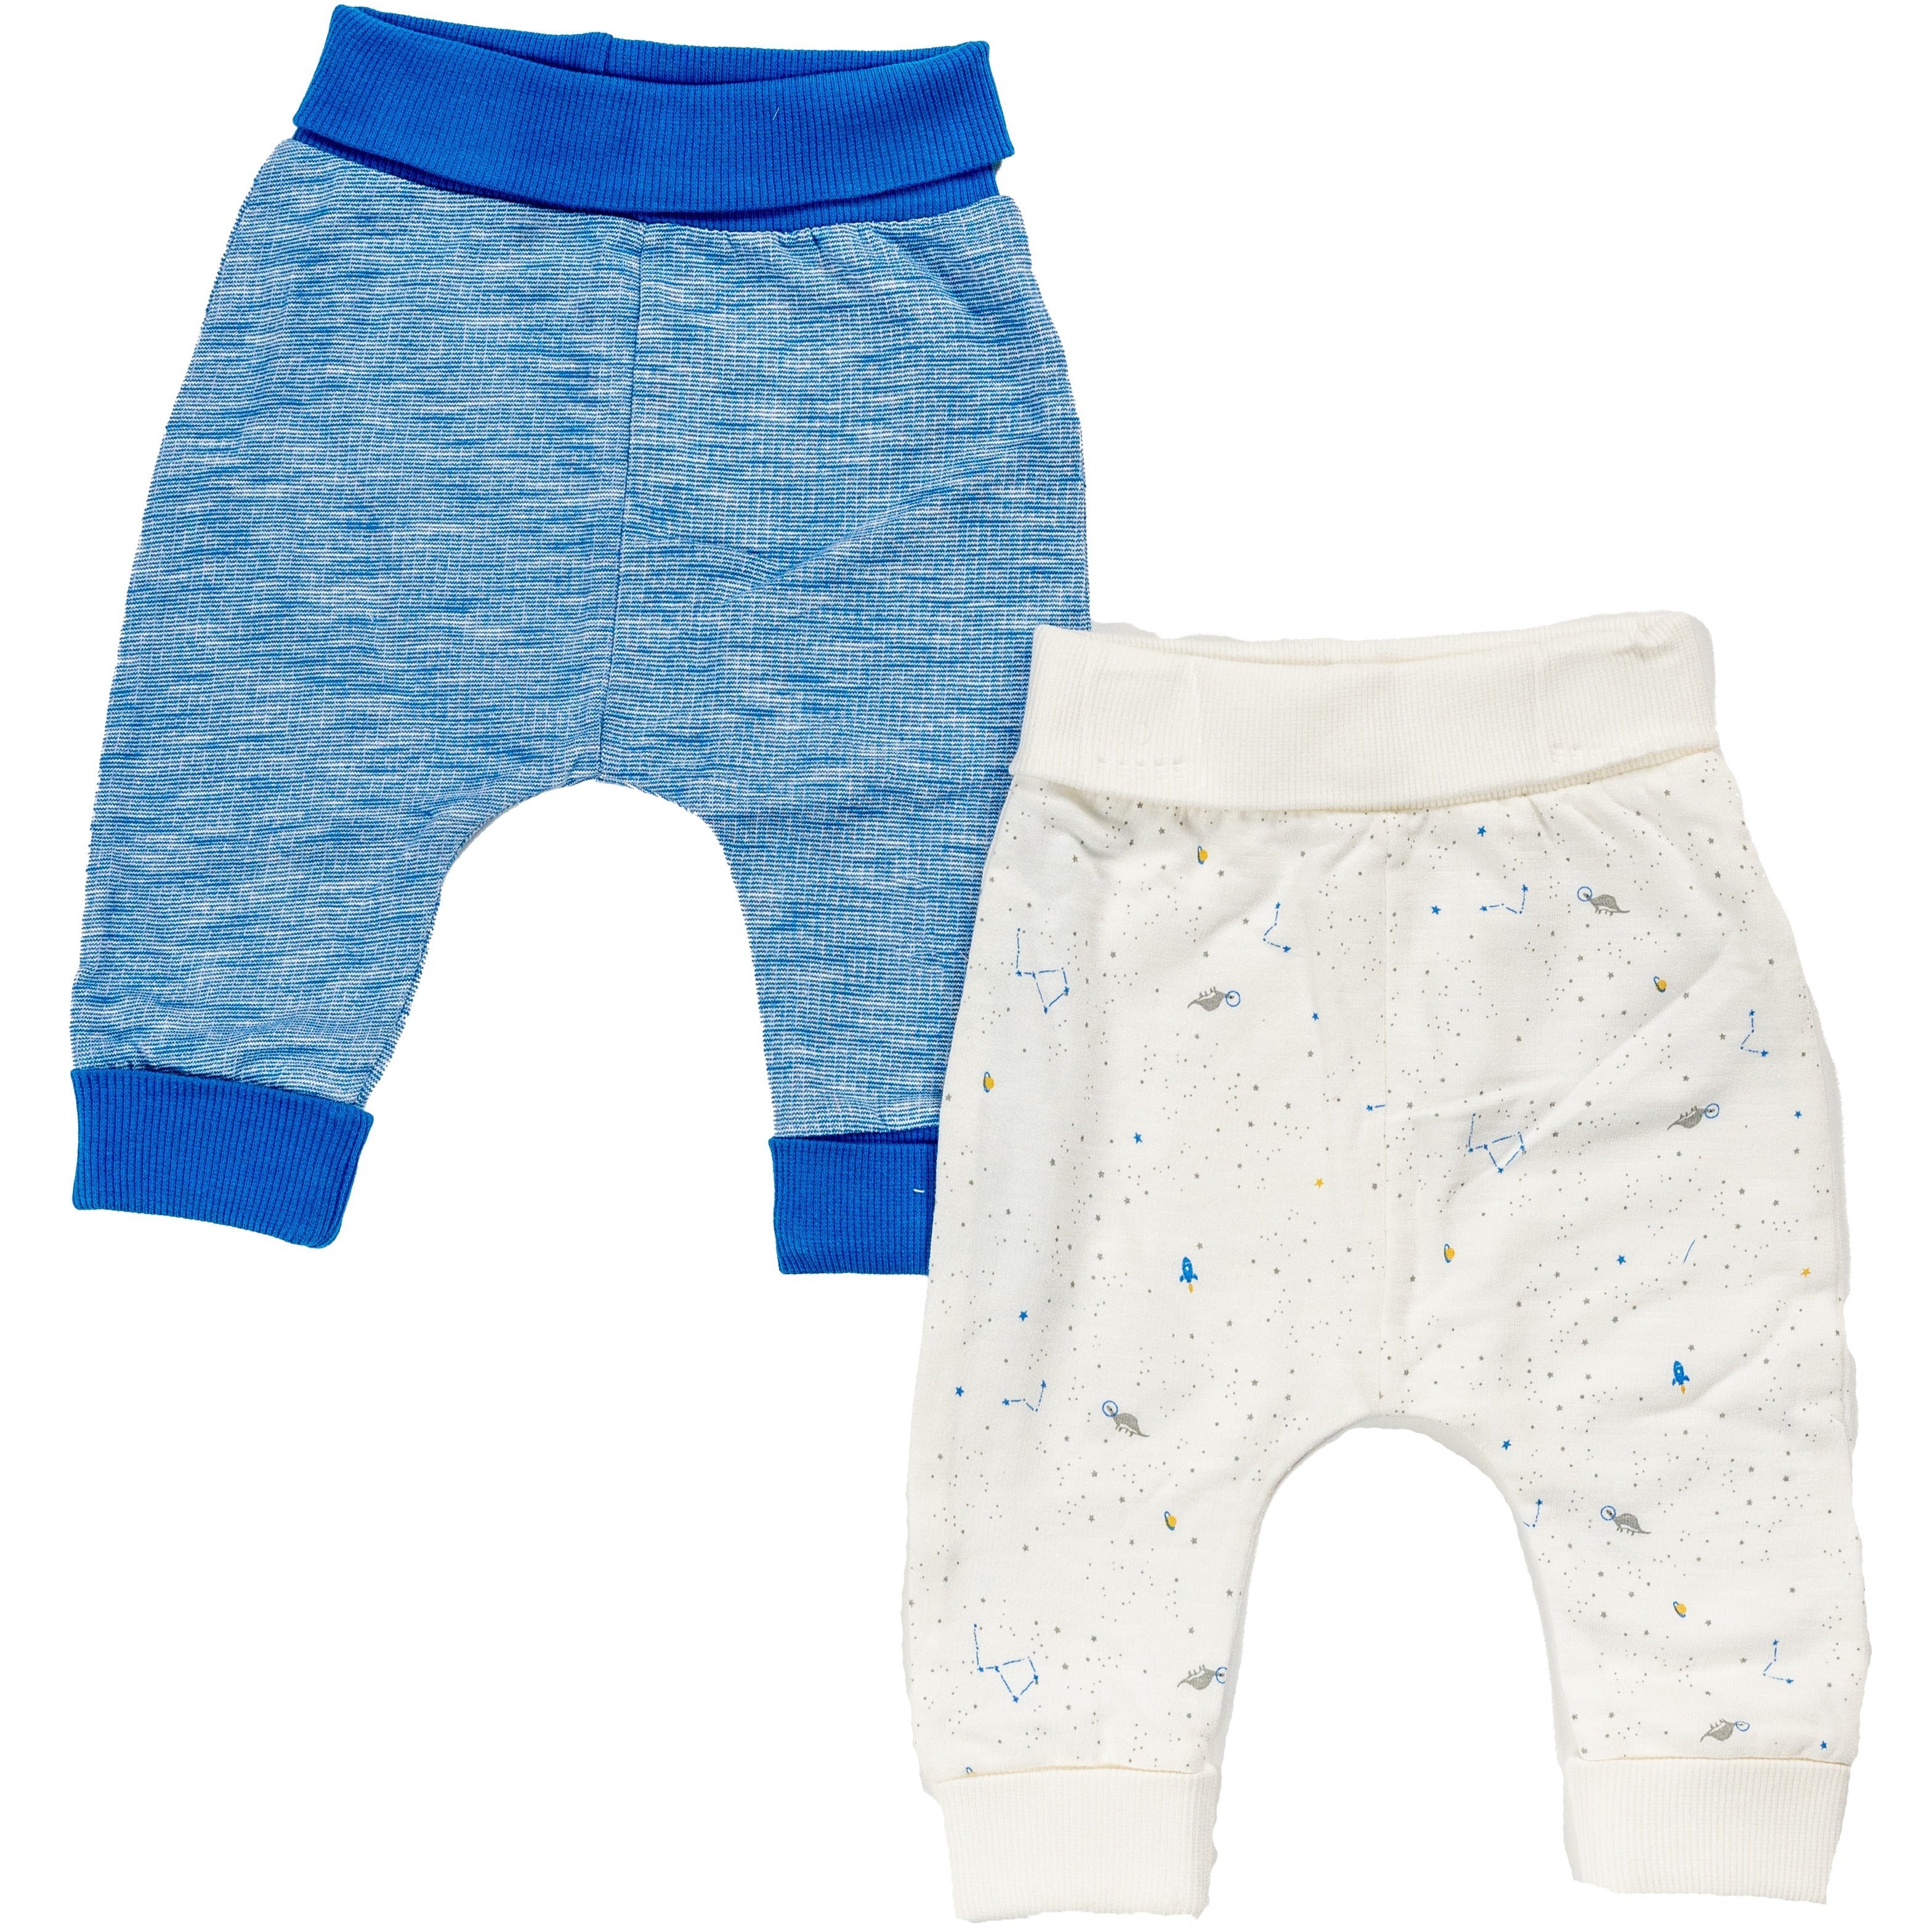 Mothercare A Roar Able Trouser Set of 2 Blue/White A496 Age- 3 Months to 24 Months